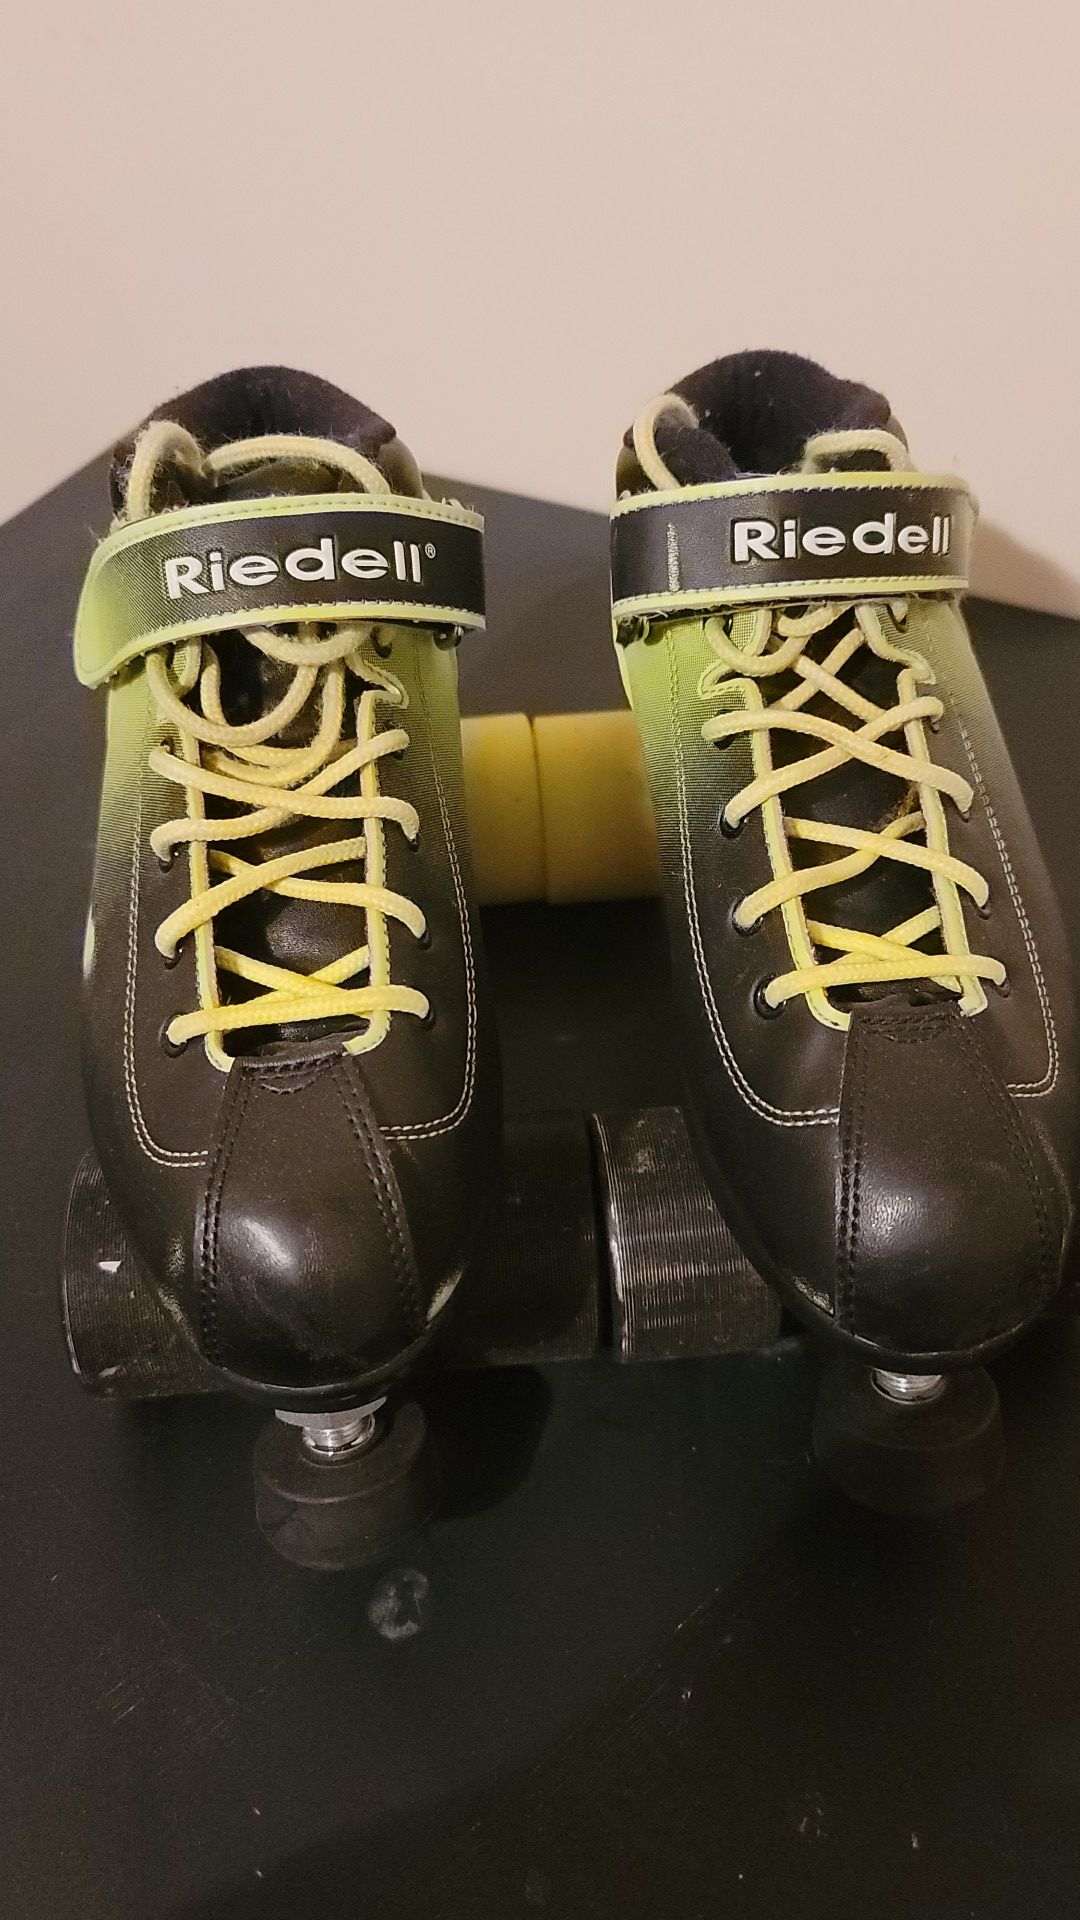 Riedell Roller Skates woman Size 7